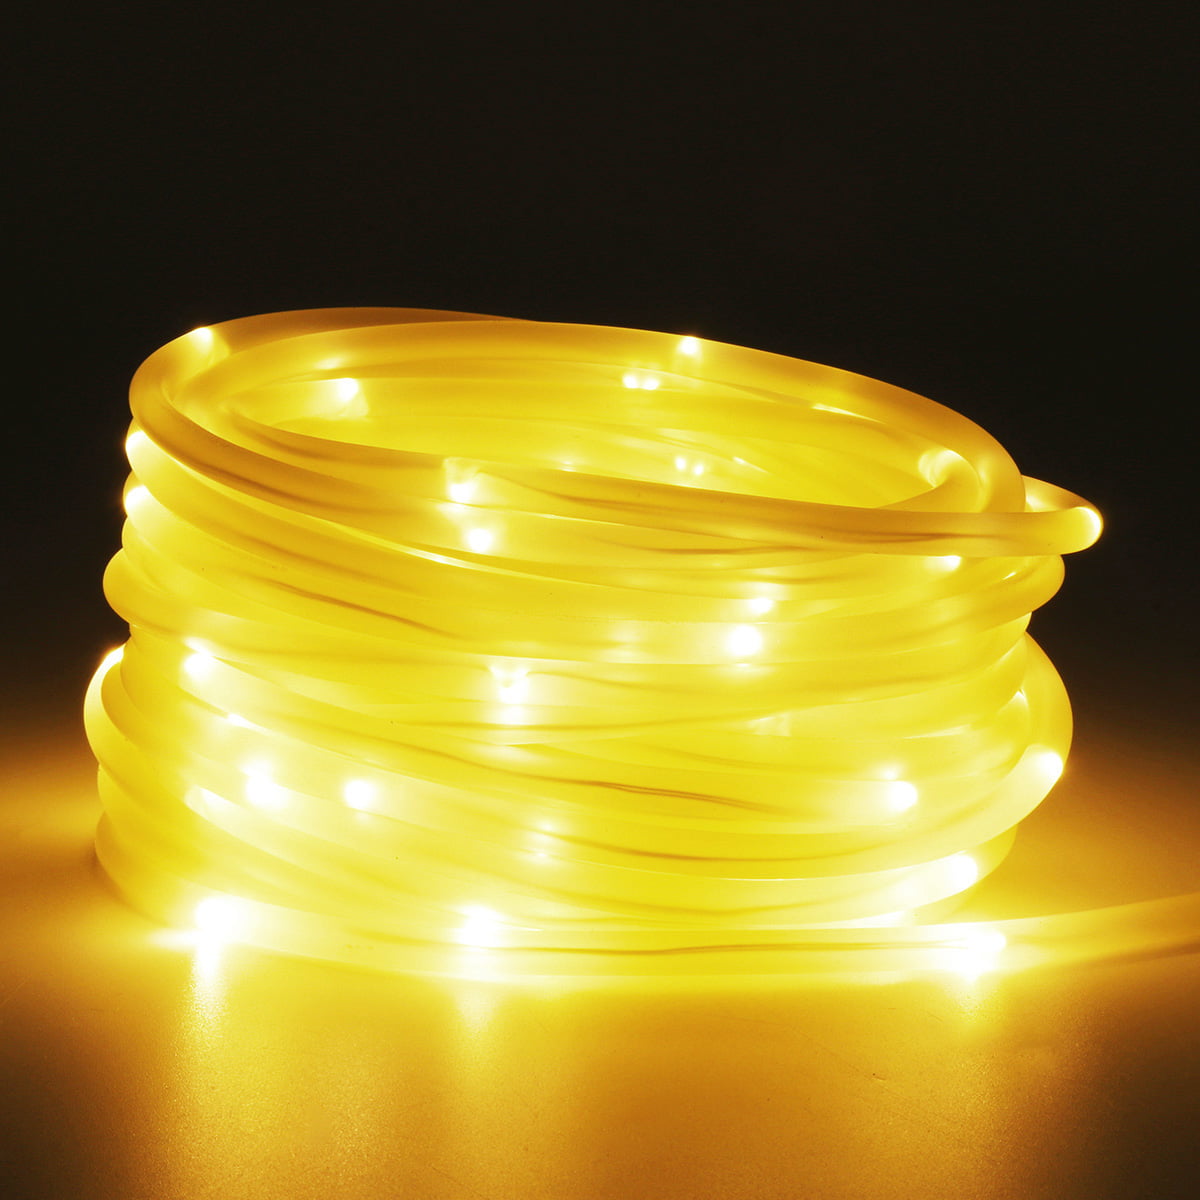 100 x LED 10mm Yellow Gold Ultra Bright Water Clear Round Top LEDs Light RC Car 